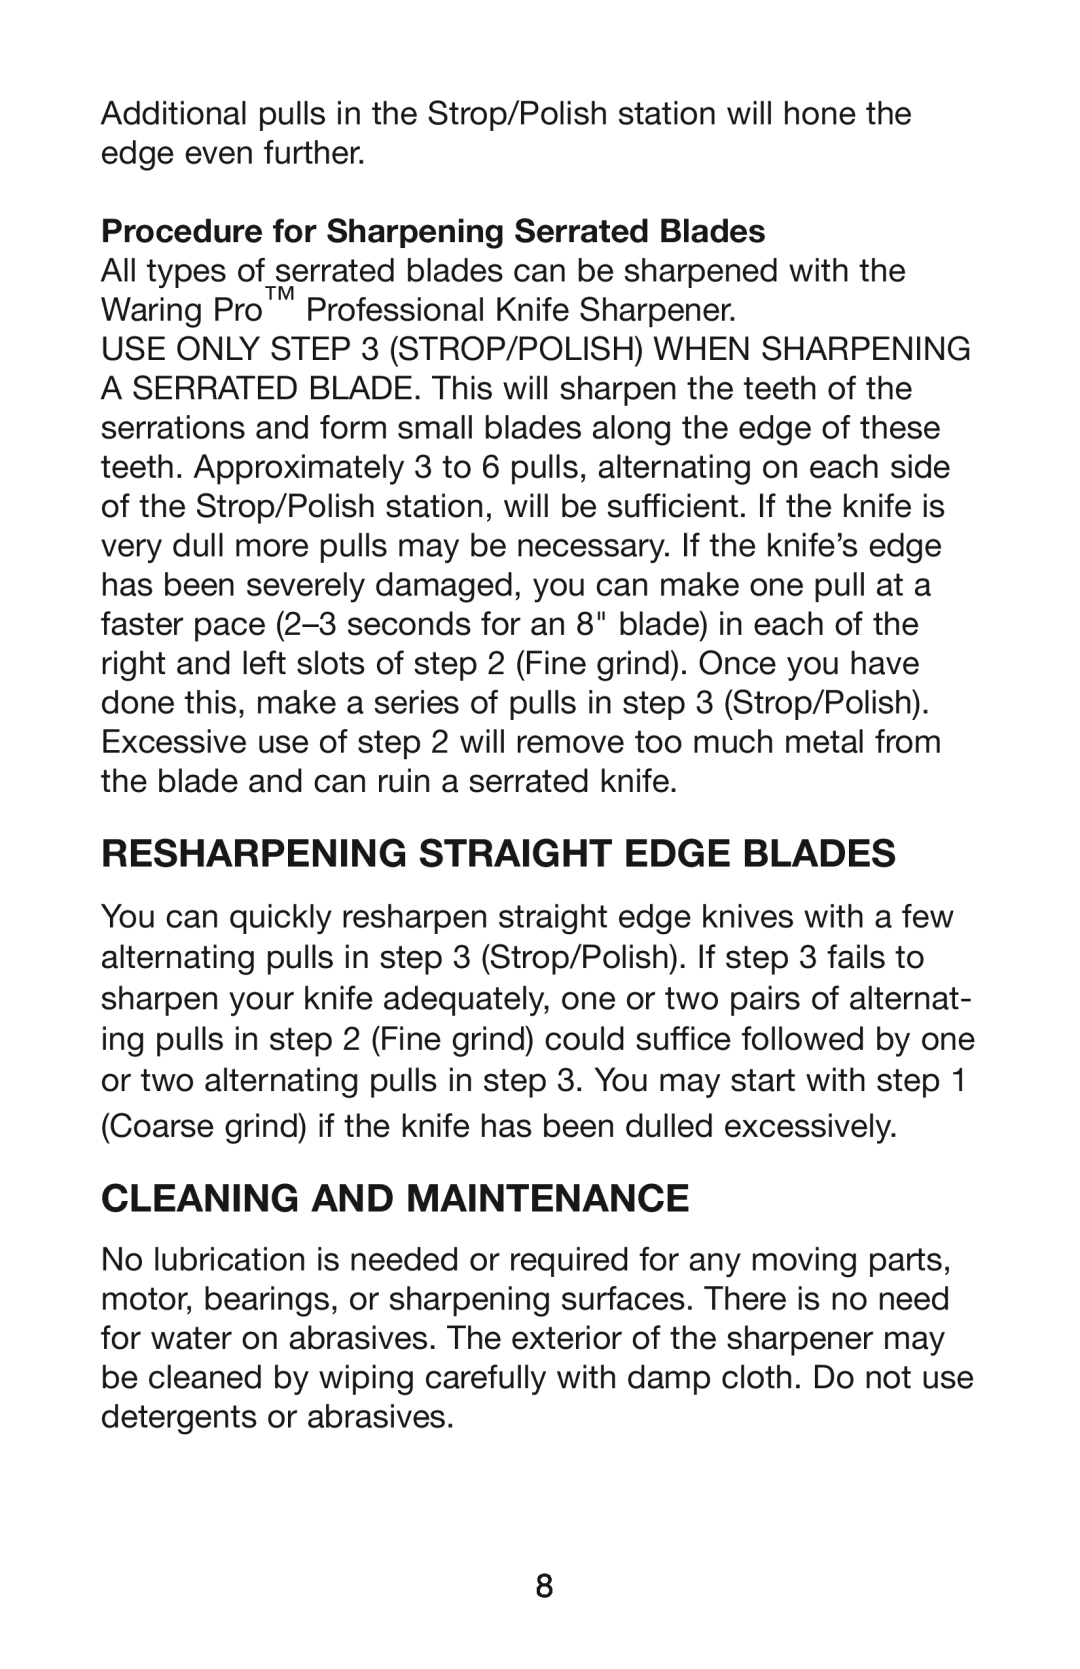 Waring KS80 manual Resharpening Straight Edge Blades, Cleaning And Maintenance, Procedure for Sharpening Serrated Blades 